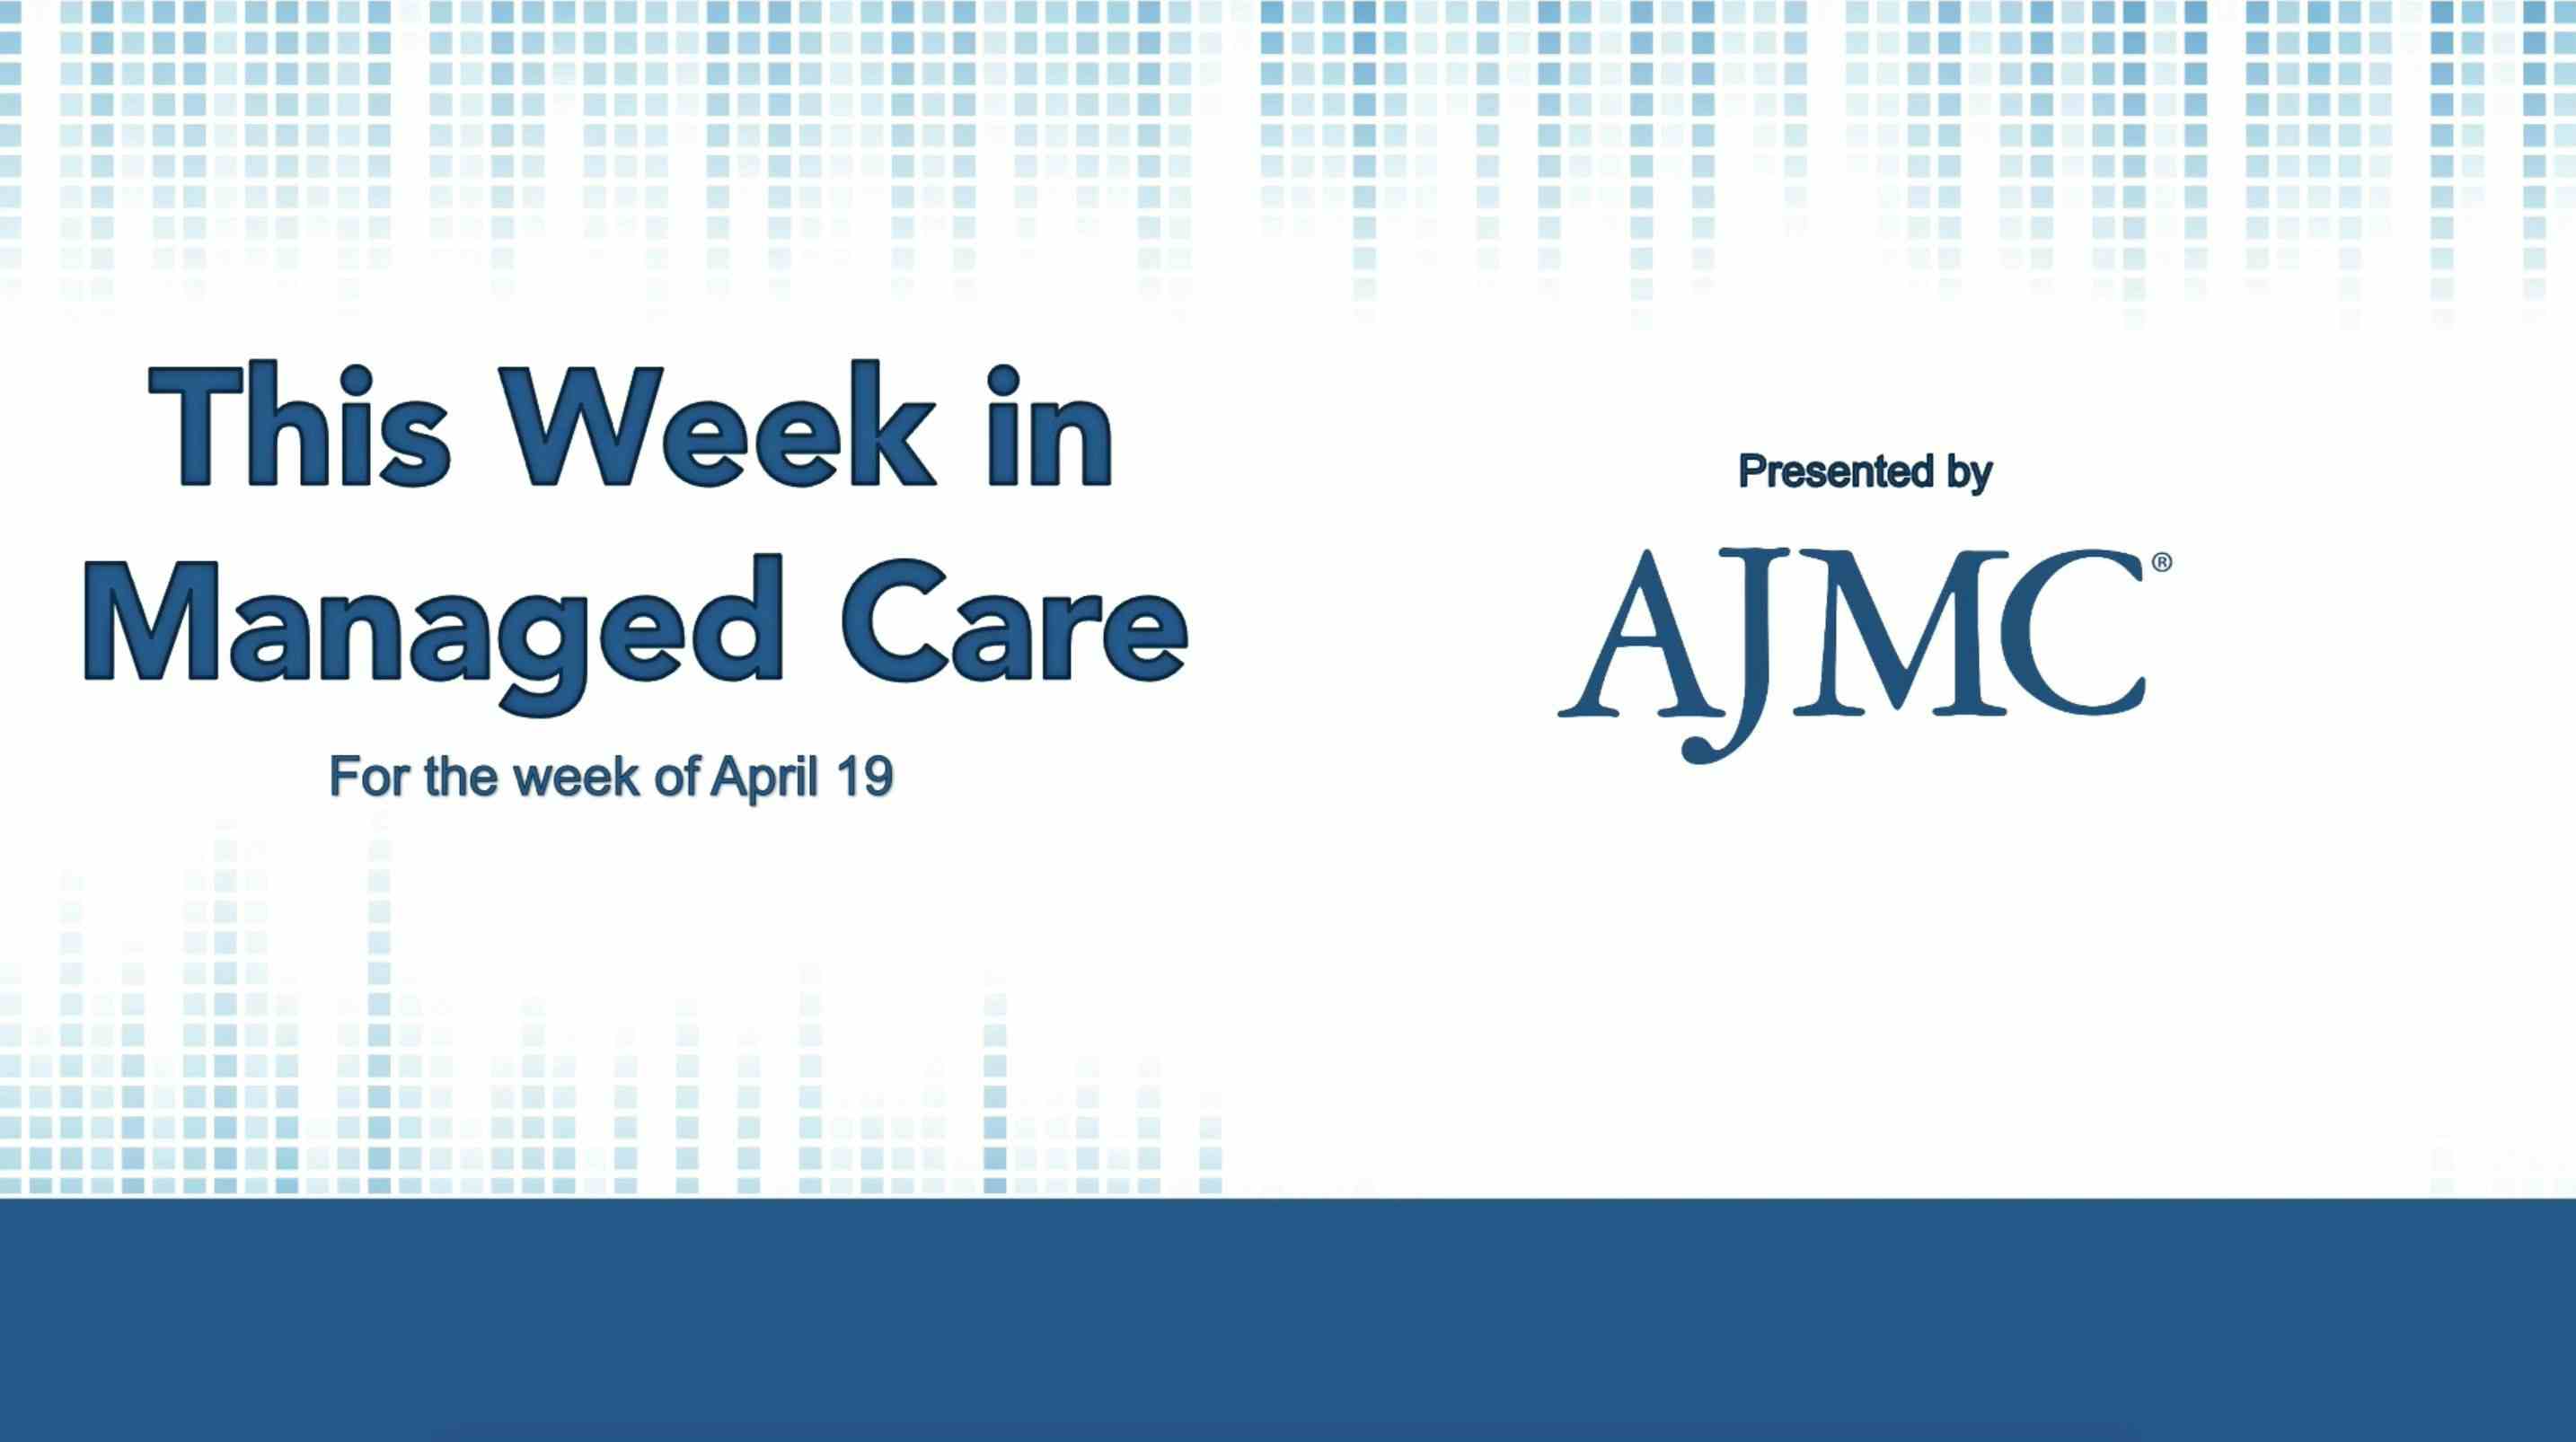 This Week in Managed Care: April 23, 2021